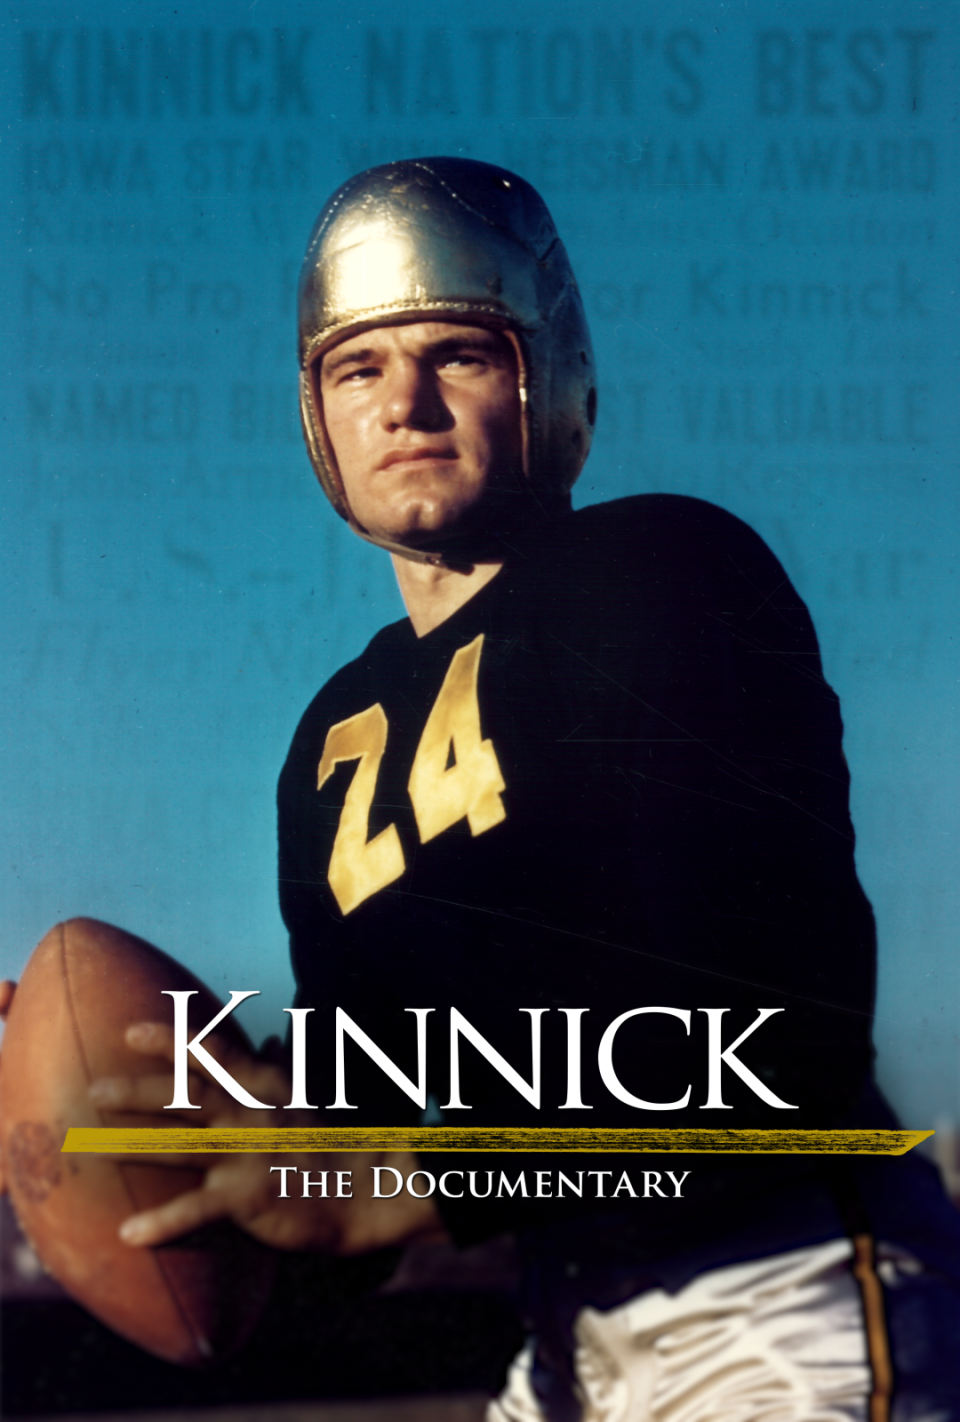 Iowa football player and Heisman Trophy winner Nile Kinnick will be honored in a new film, "Kinnick: The Documentary," set to release on Vimeo in August.